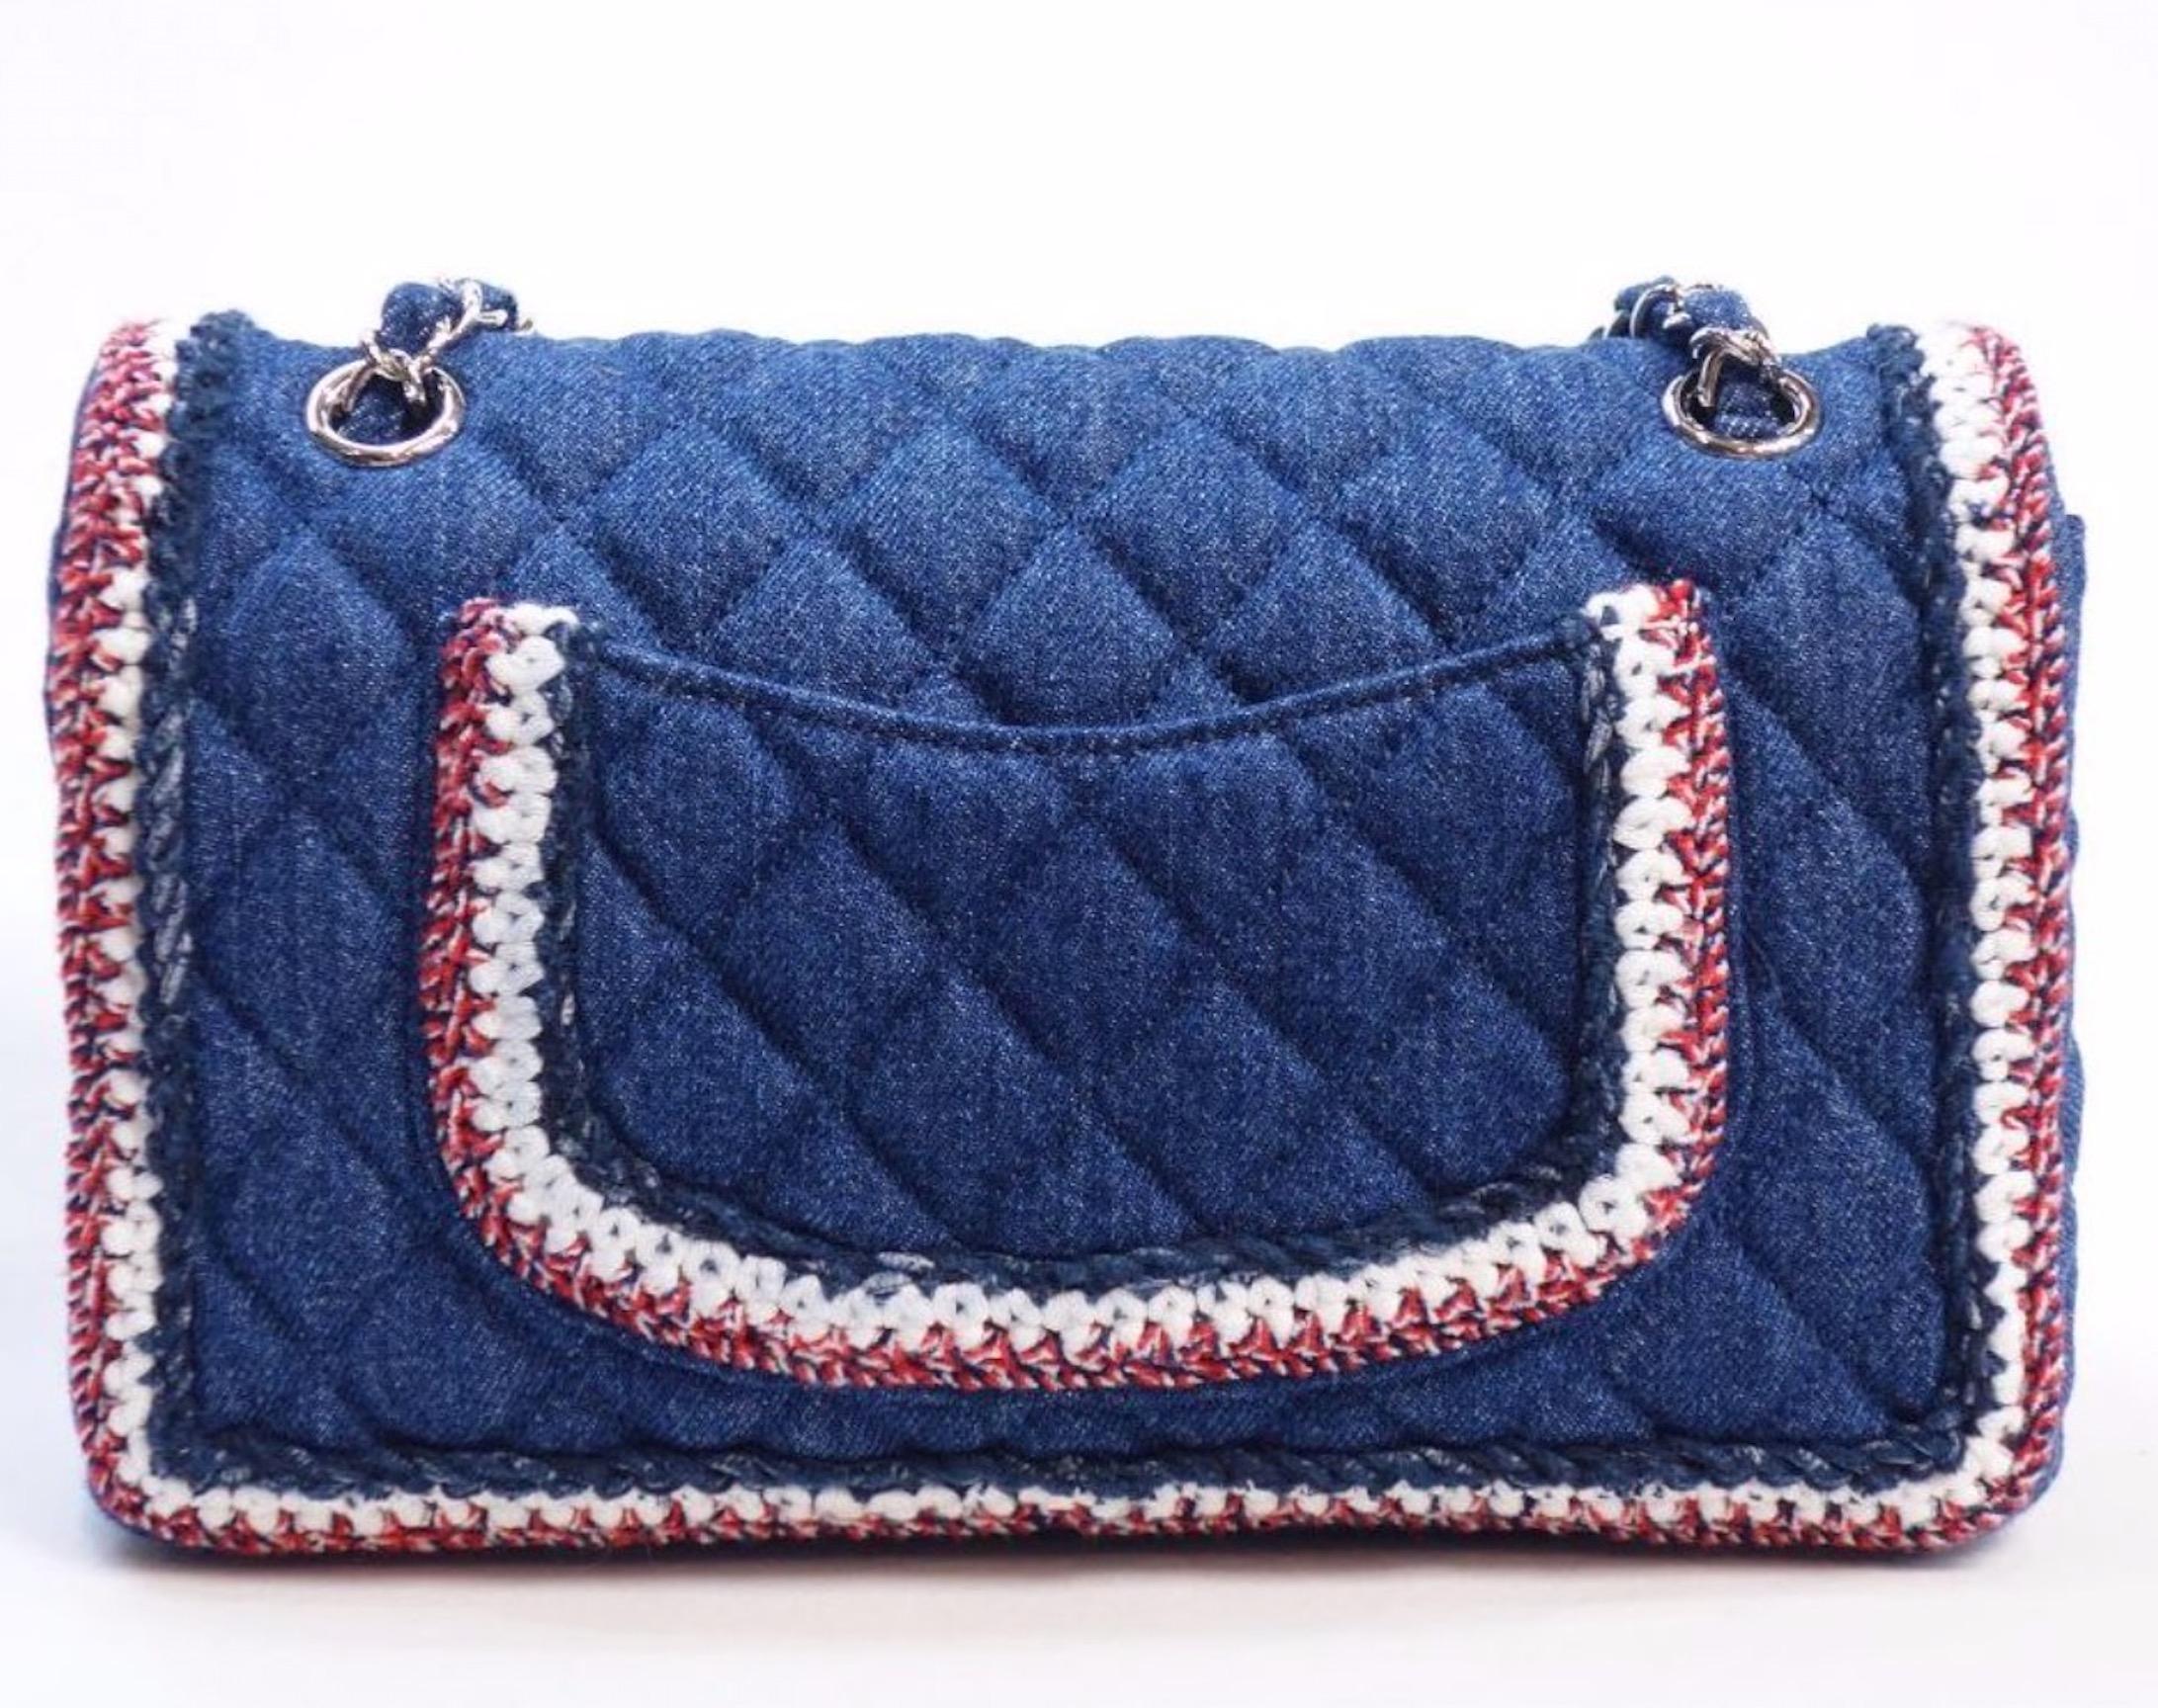 red white and blue chanel bag